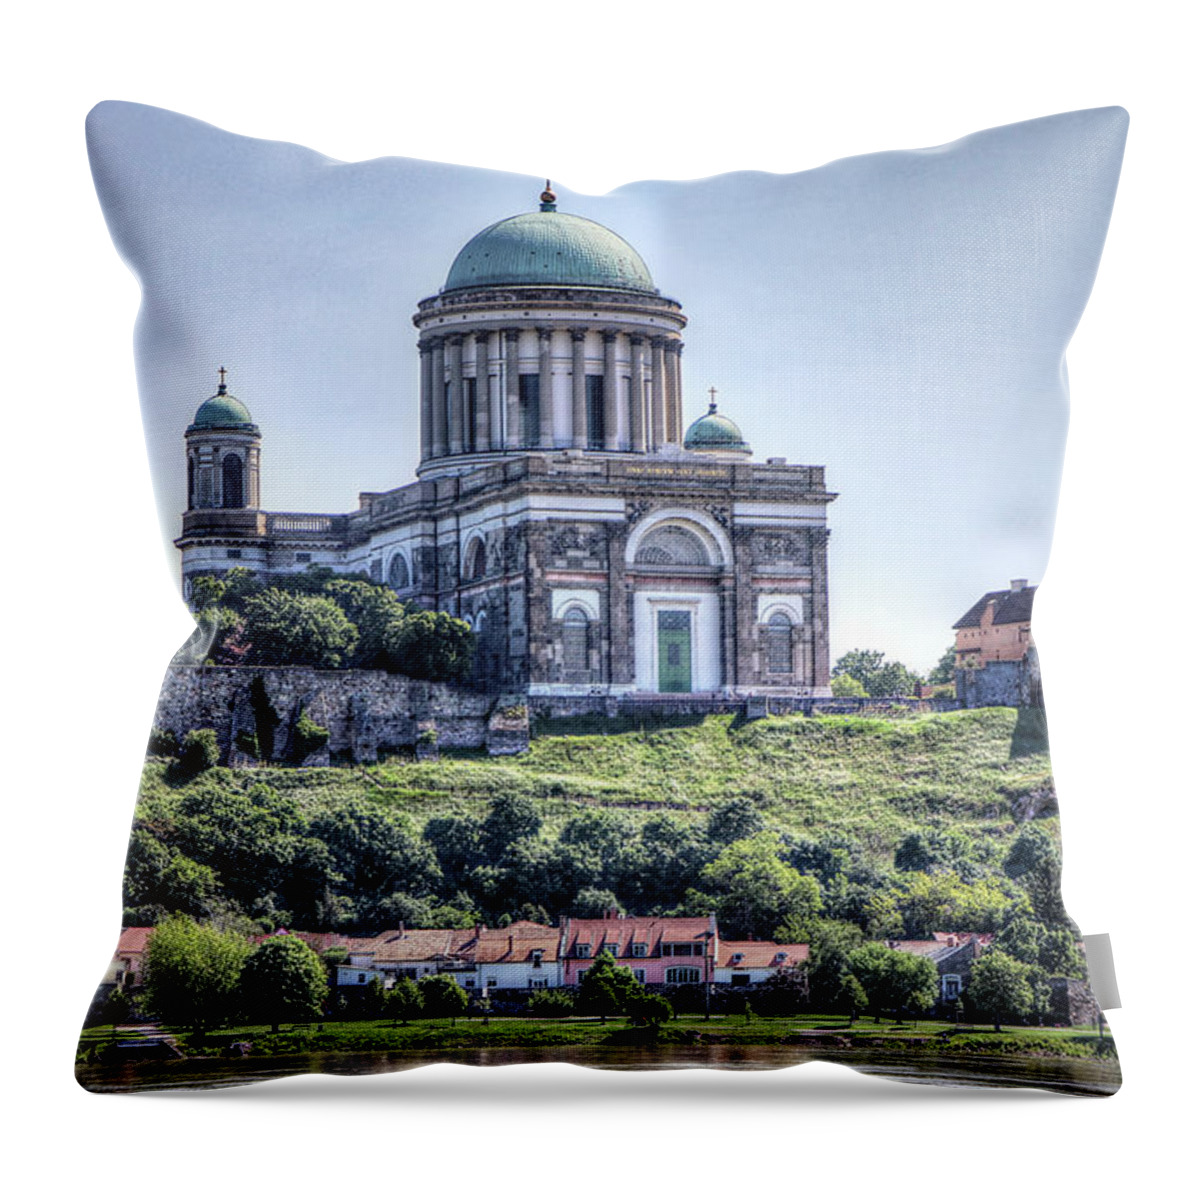 Visegrad Hungary Throw Pillow featuring the photograph Visegrad Hungary #7 by Paul James Bannerman